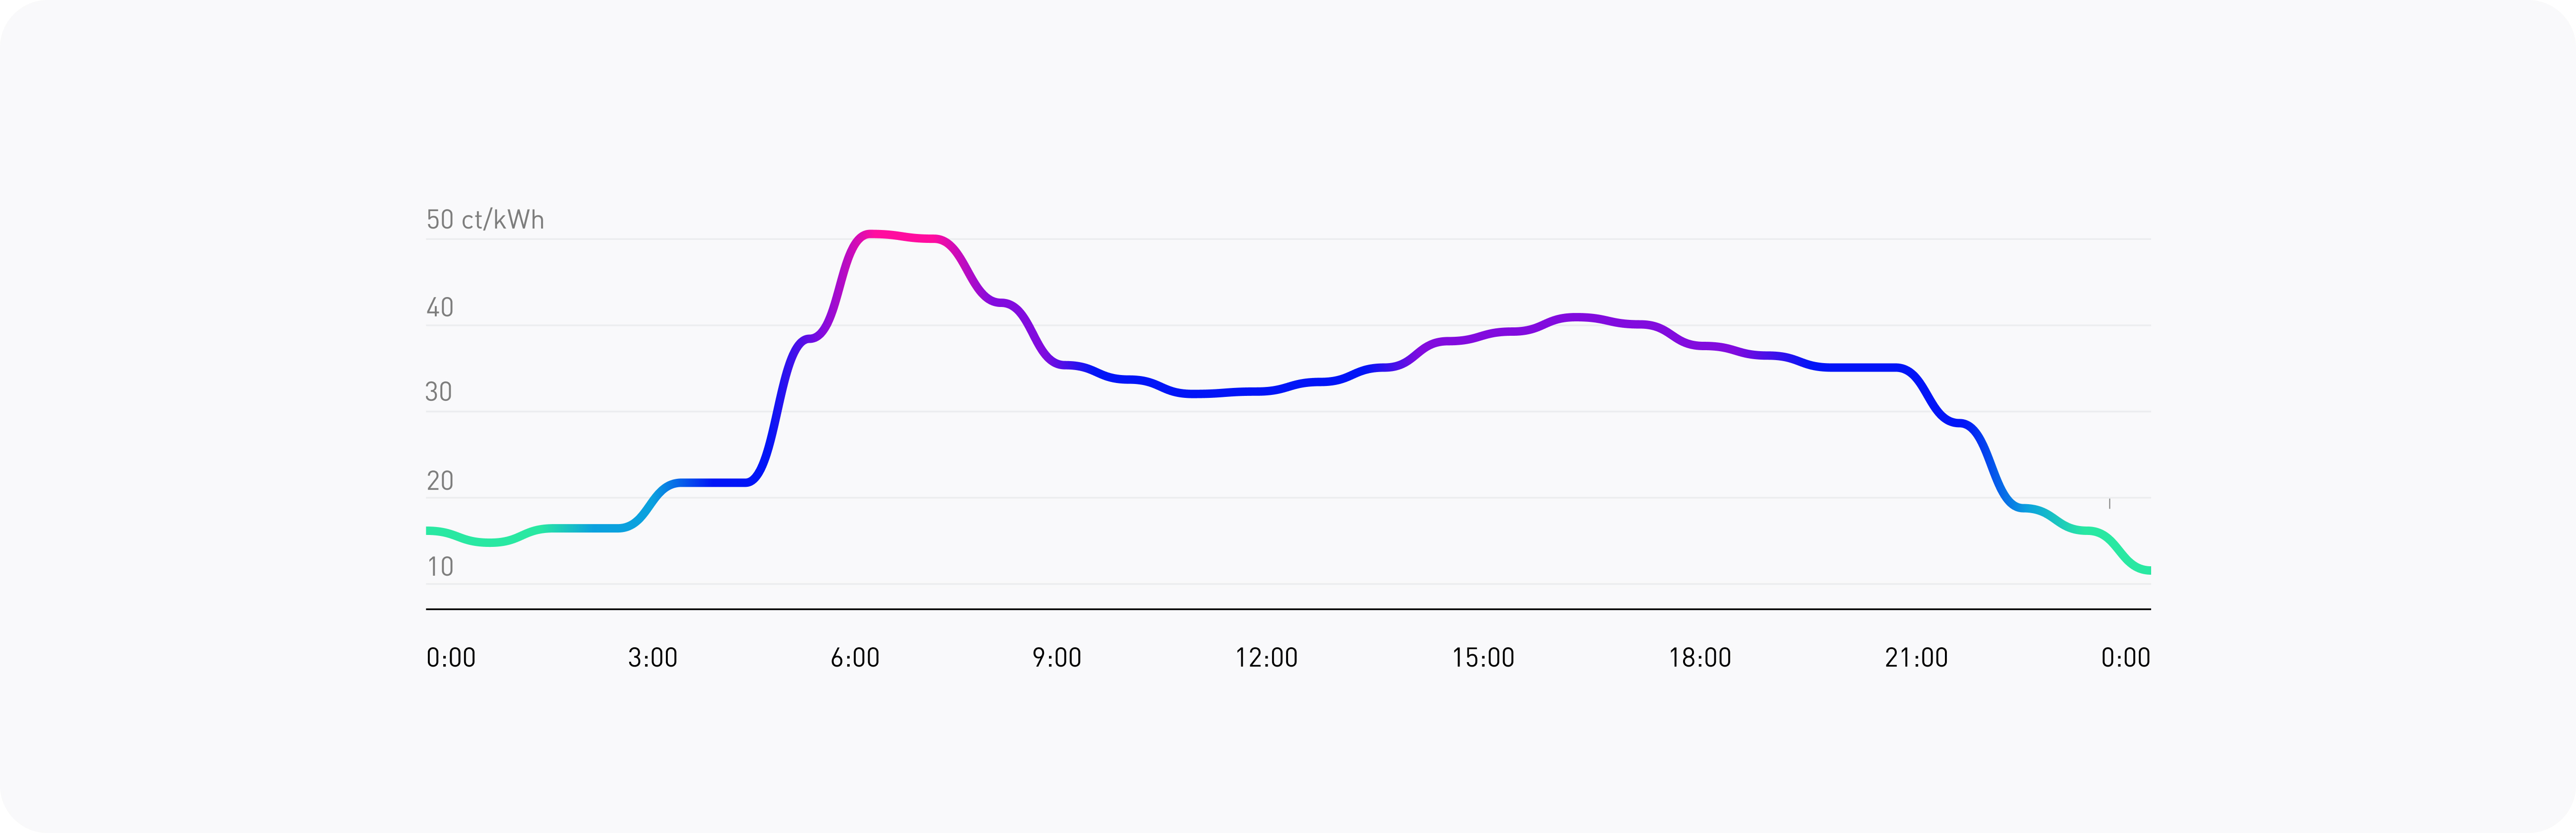 Colorful graph showing the electricity prices over the course of the day